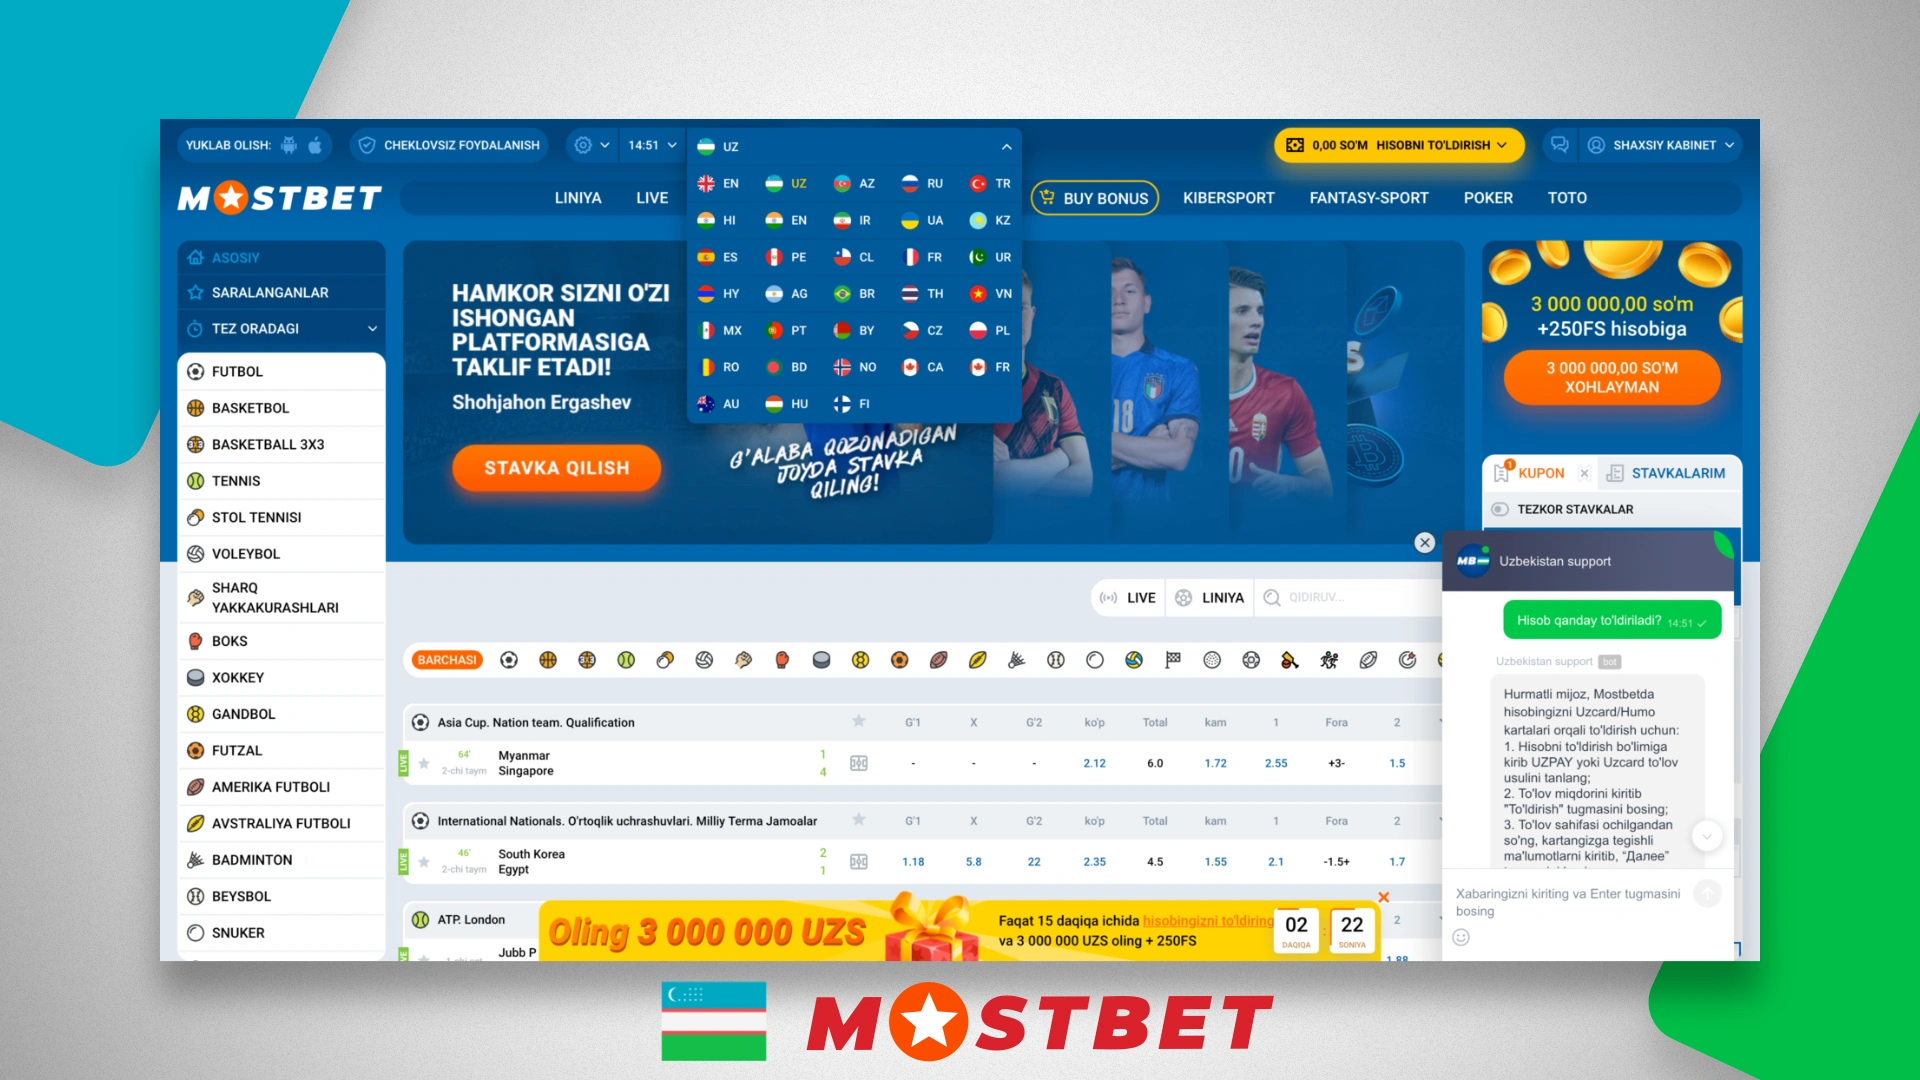 Home page of the betting company Mostbet in Uzbekistan